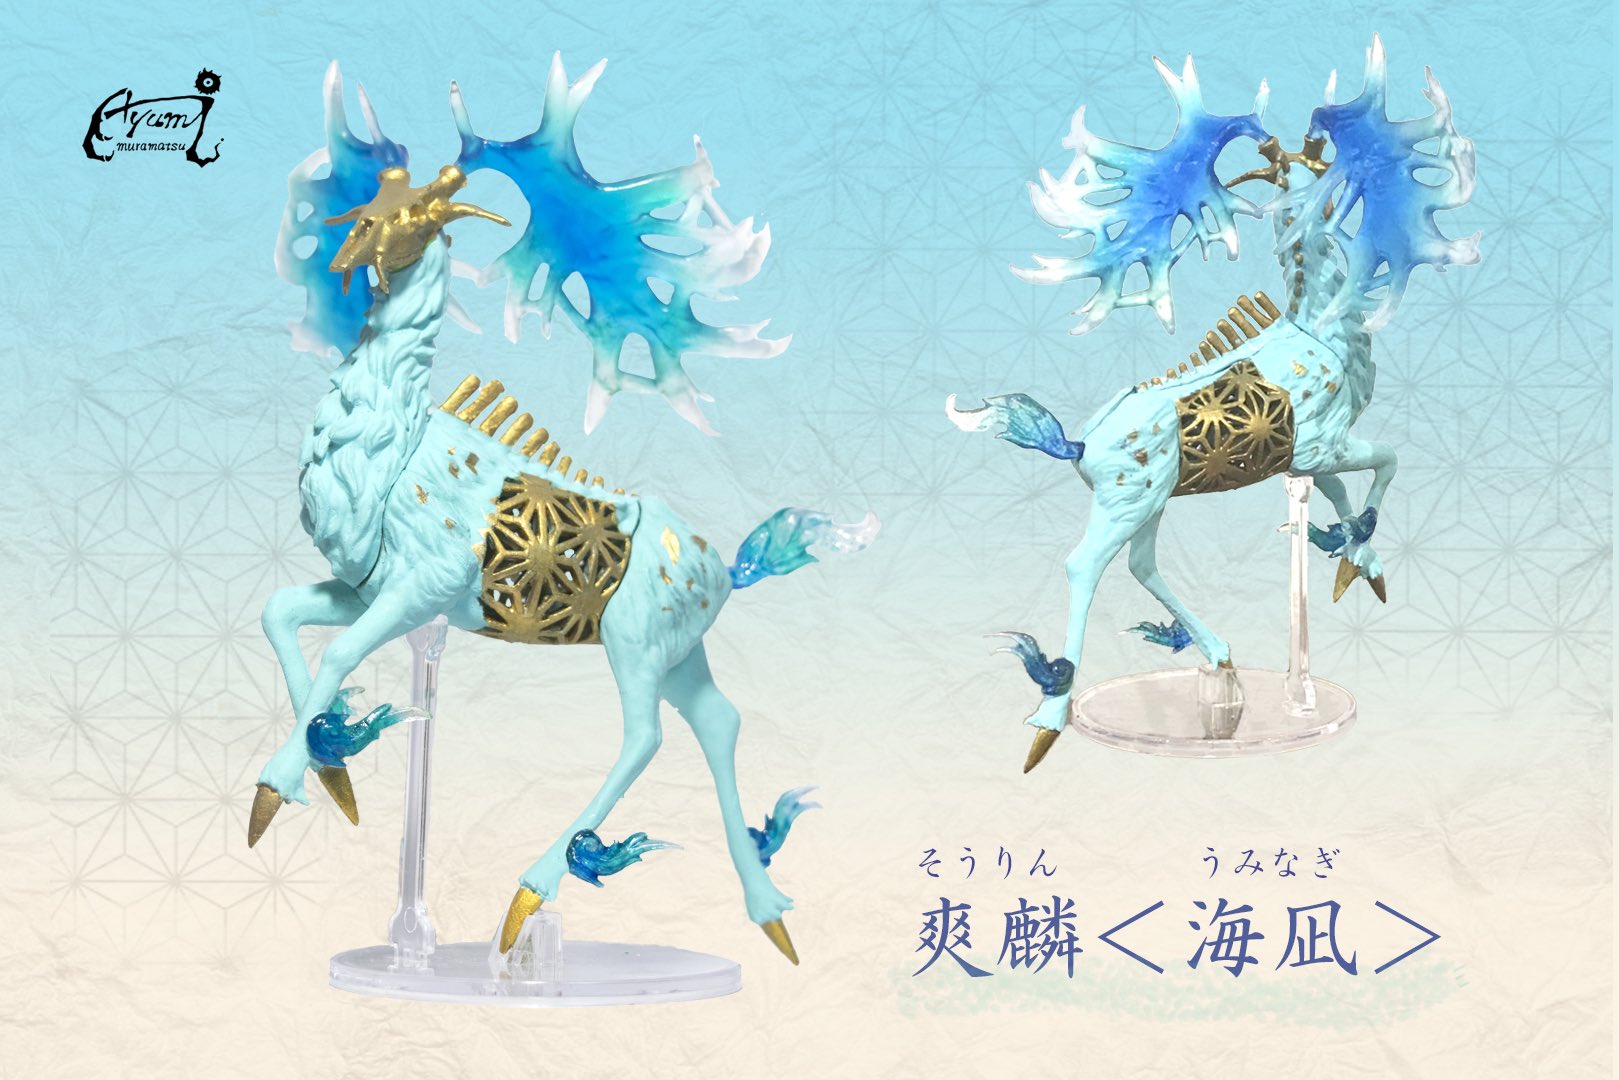 A whimsical Shenlu Four Seasons Gacha Series toy featuring a blue and gold horse figurine, part of Strangecat Toys' blind box and art toy collection.